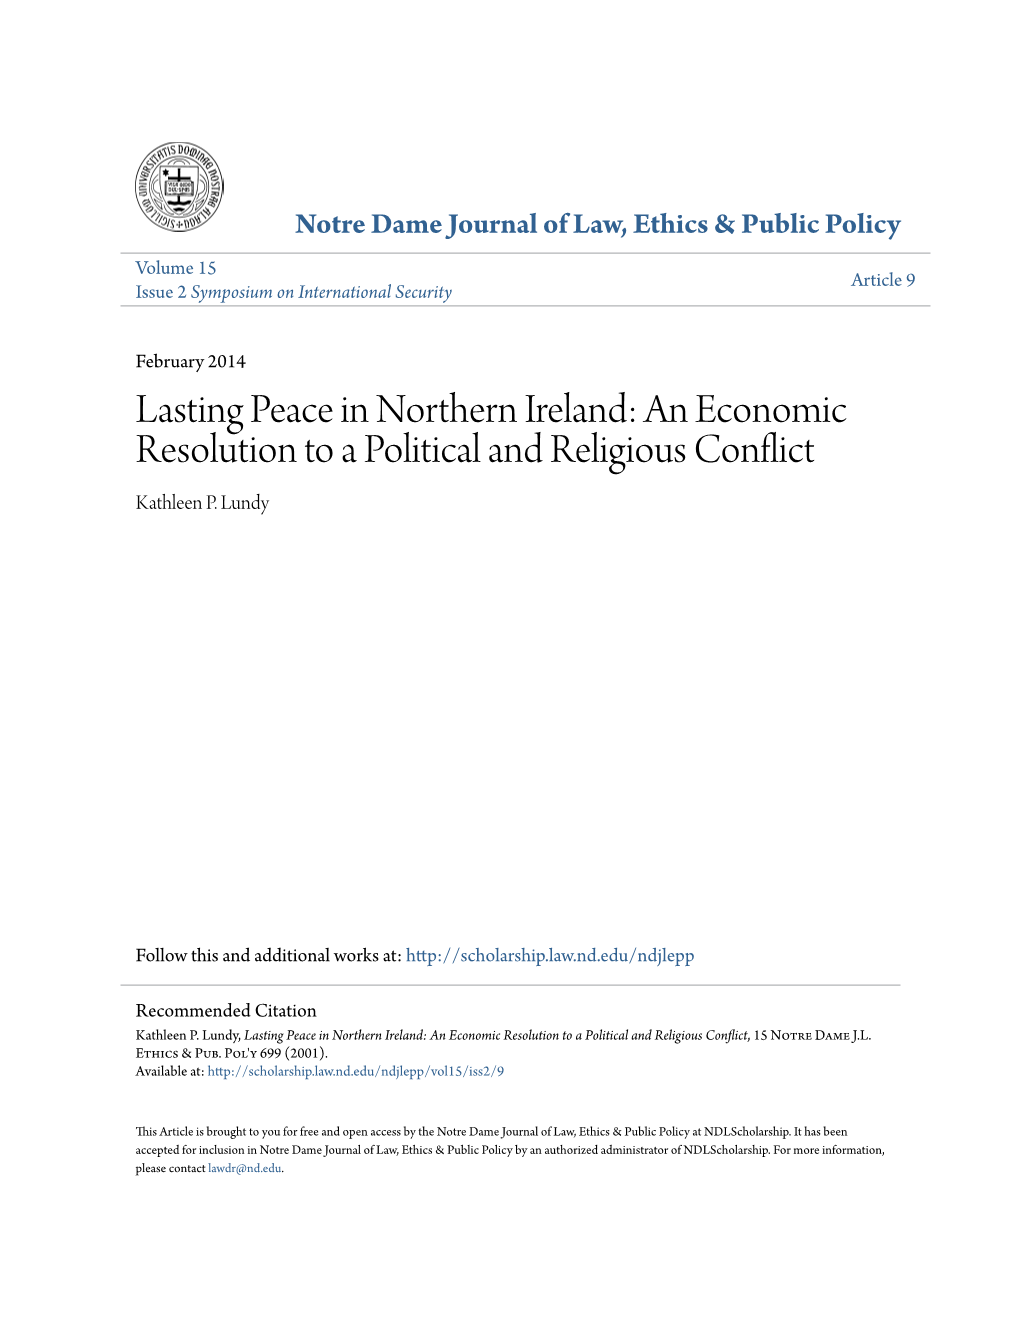 Lasting Peace in Northern Ireland: an Economic Resolution to a Political and Religious Conflict Kathleen P